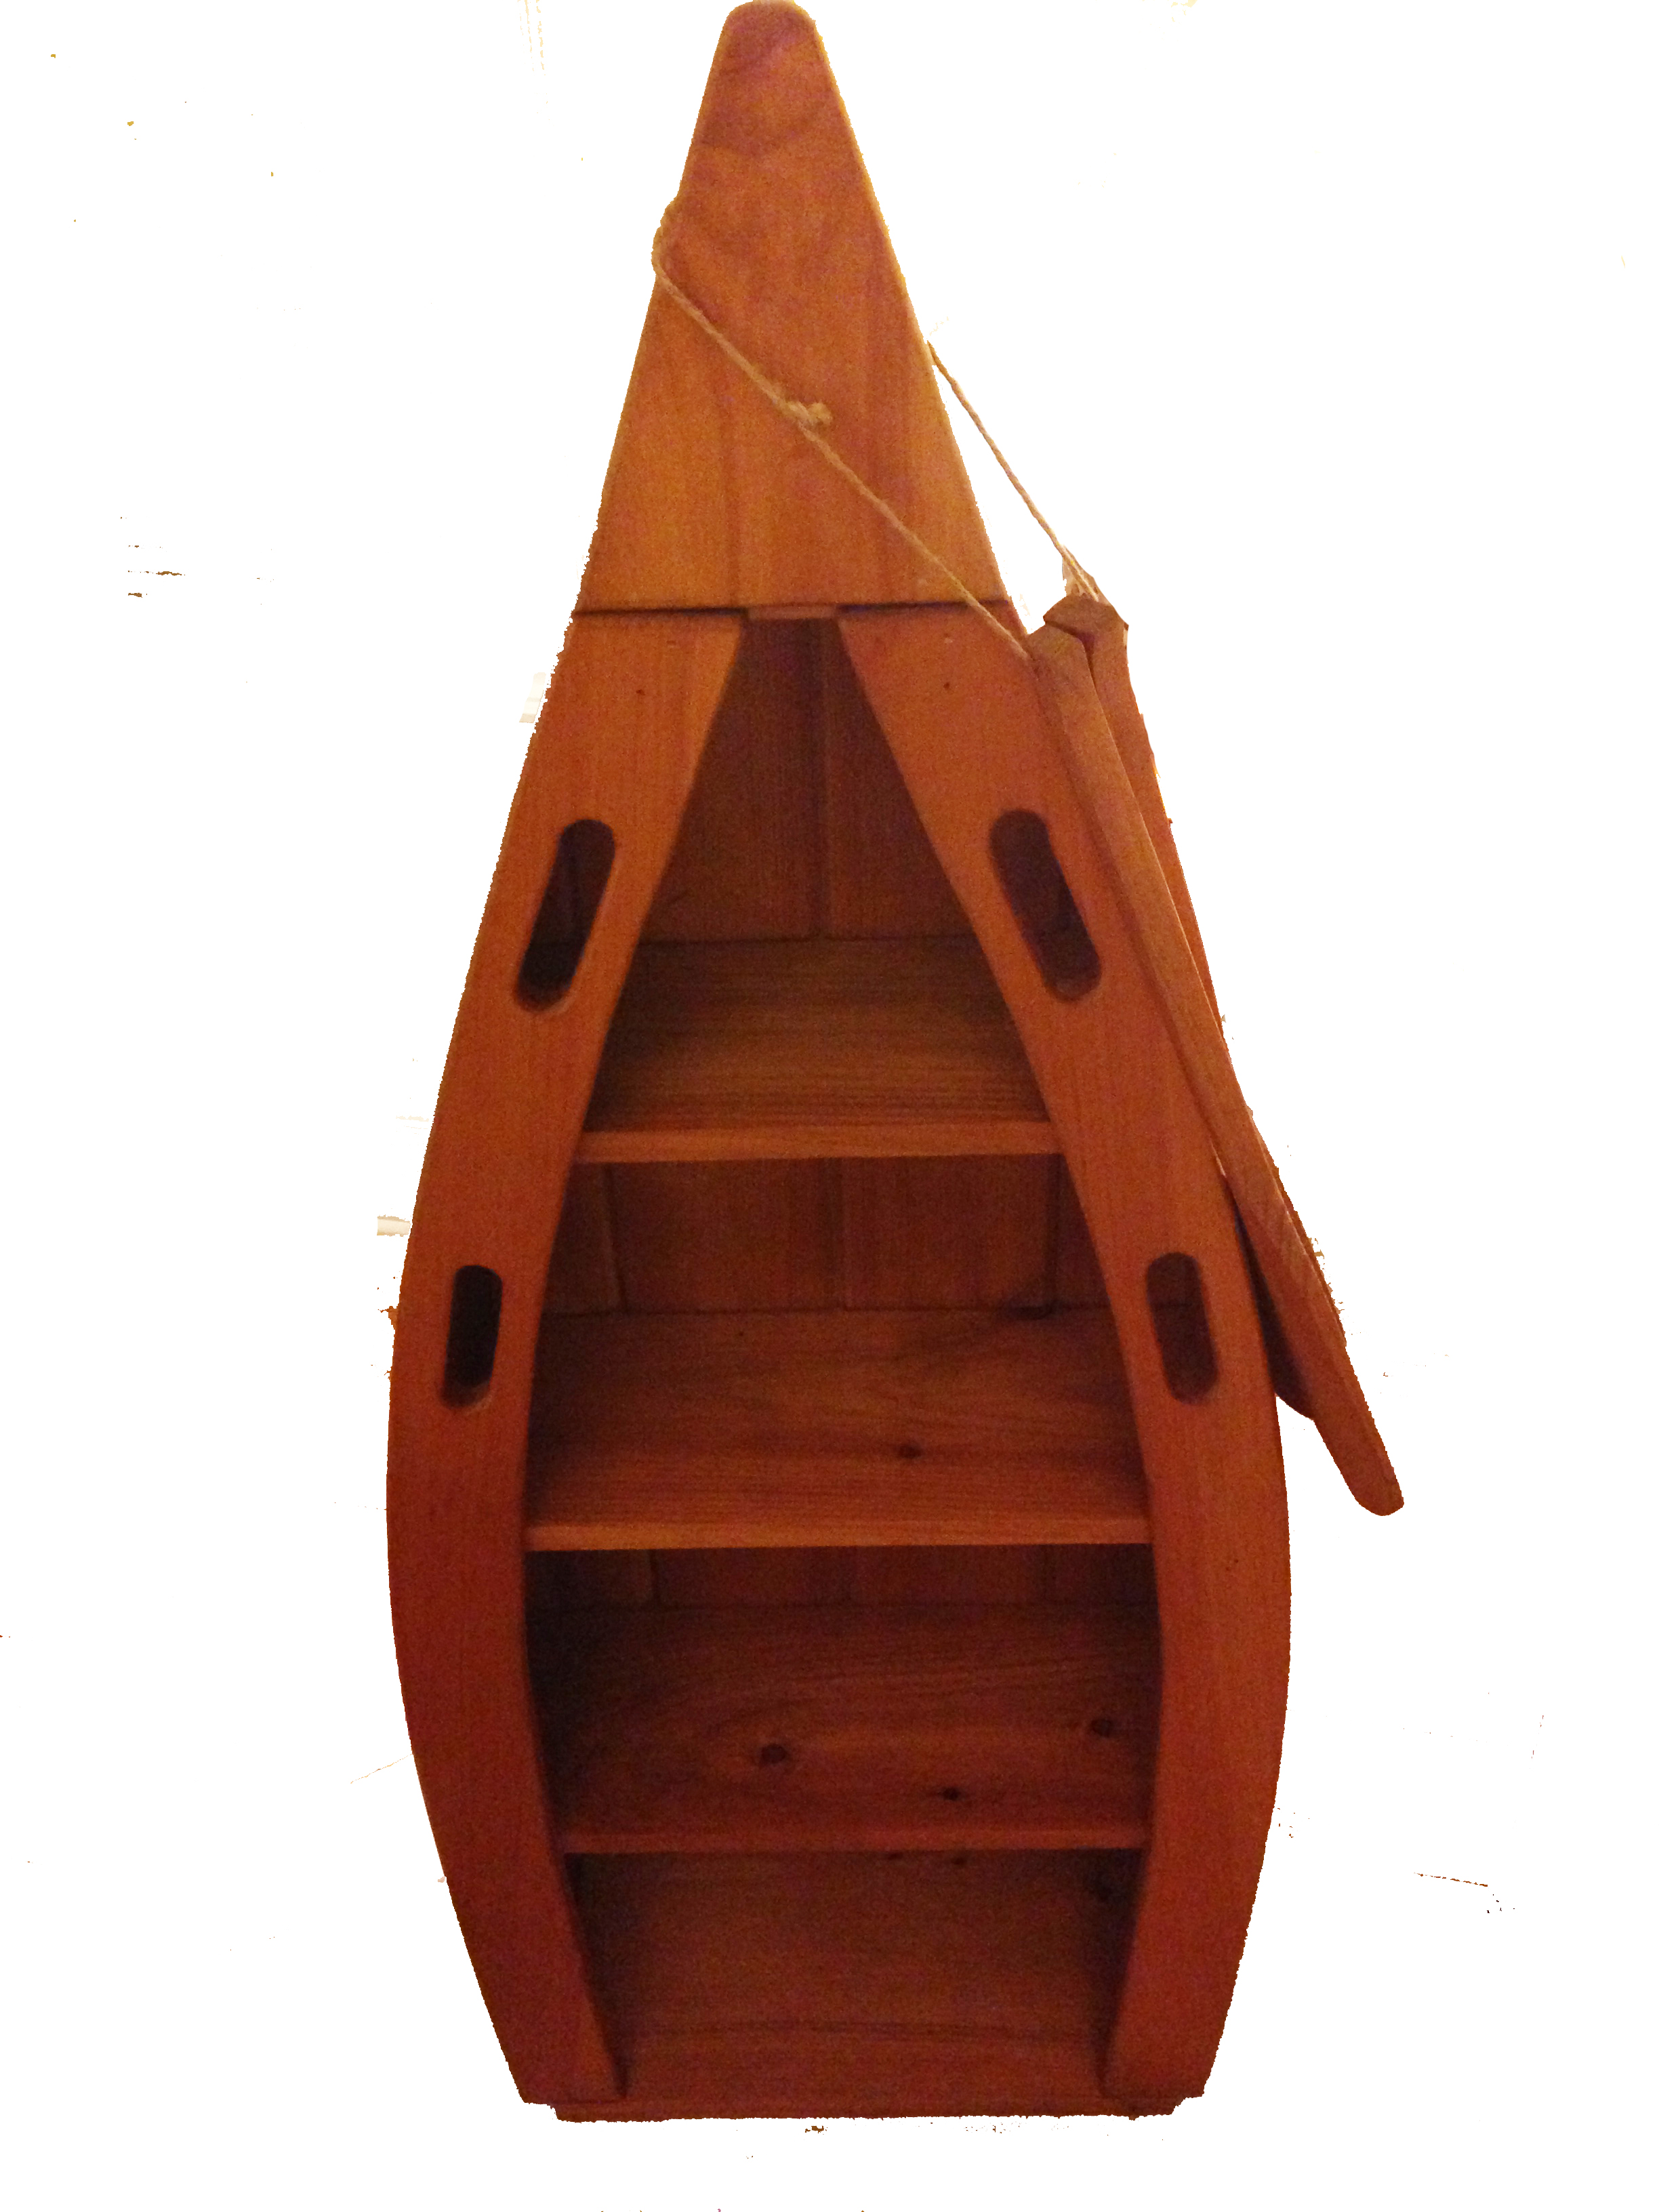 Handmade furniture for child\'s room! A wooden BOAT